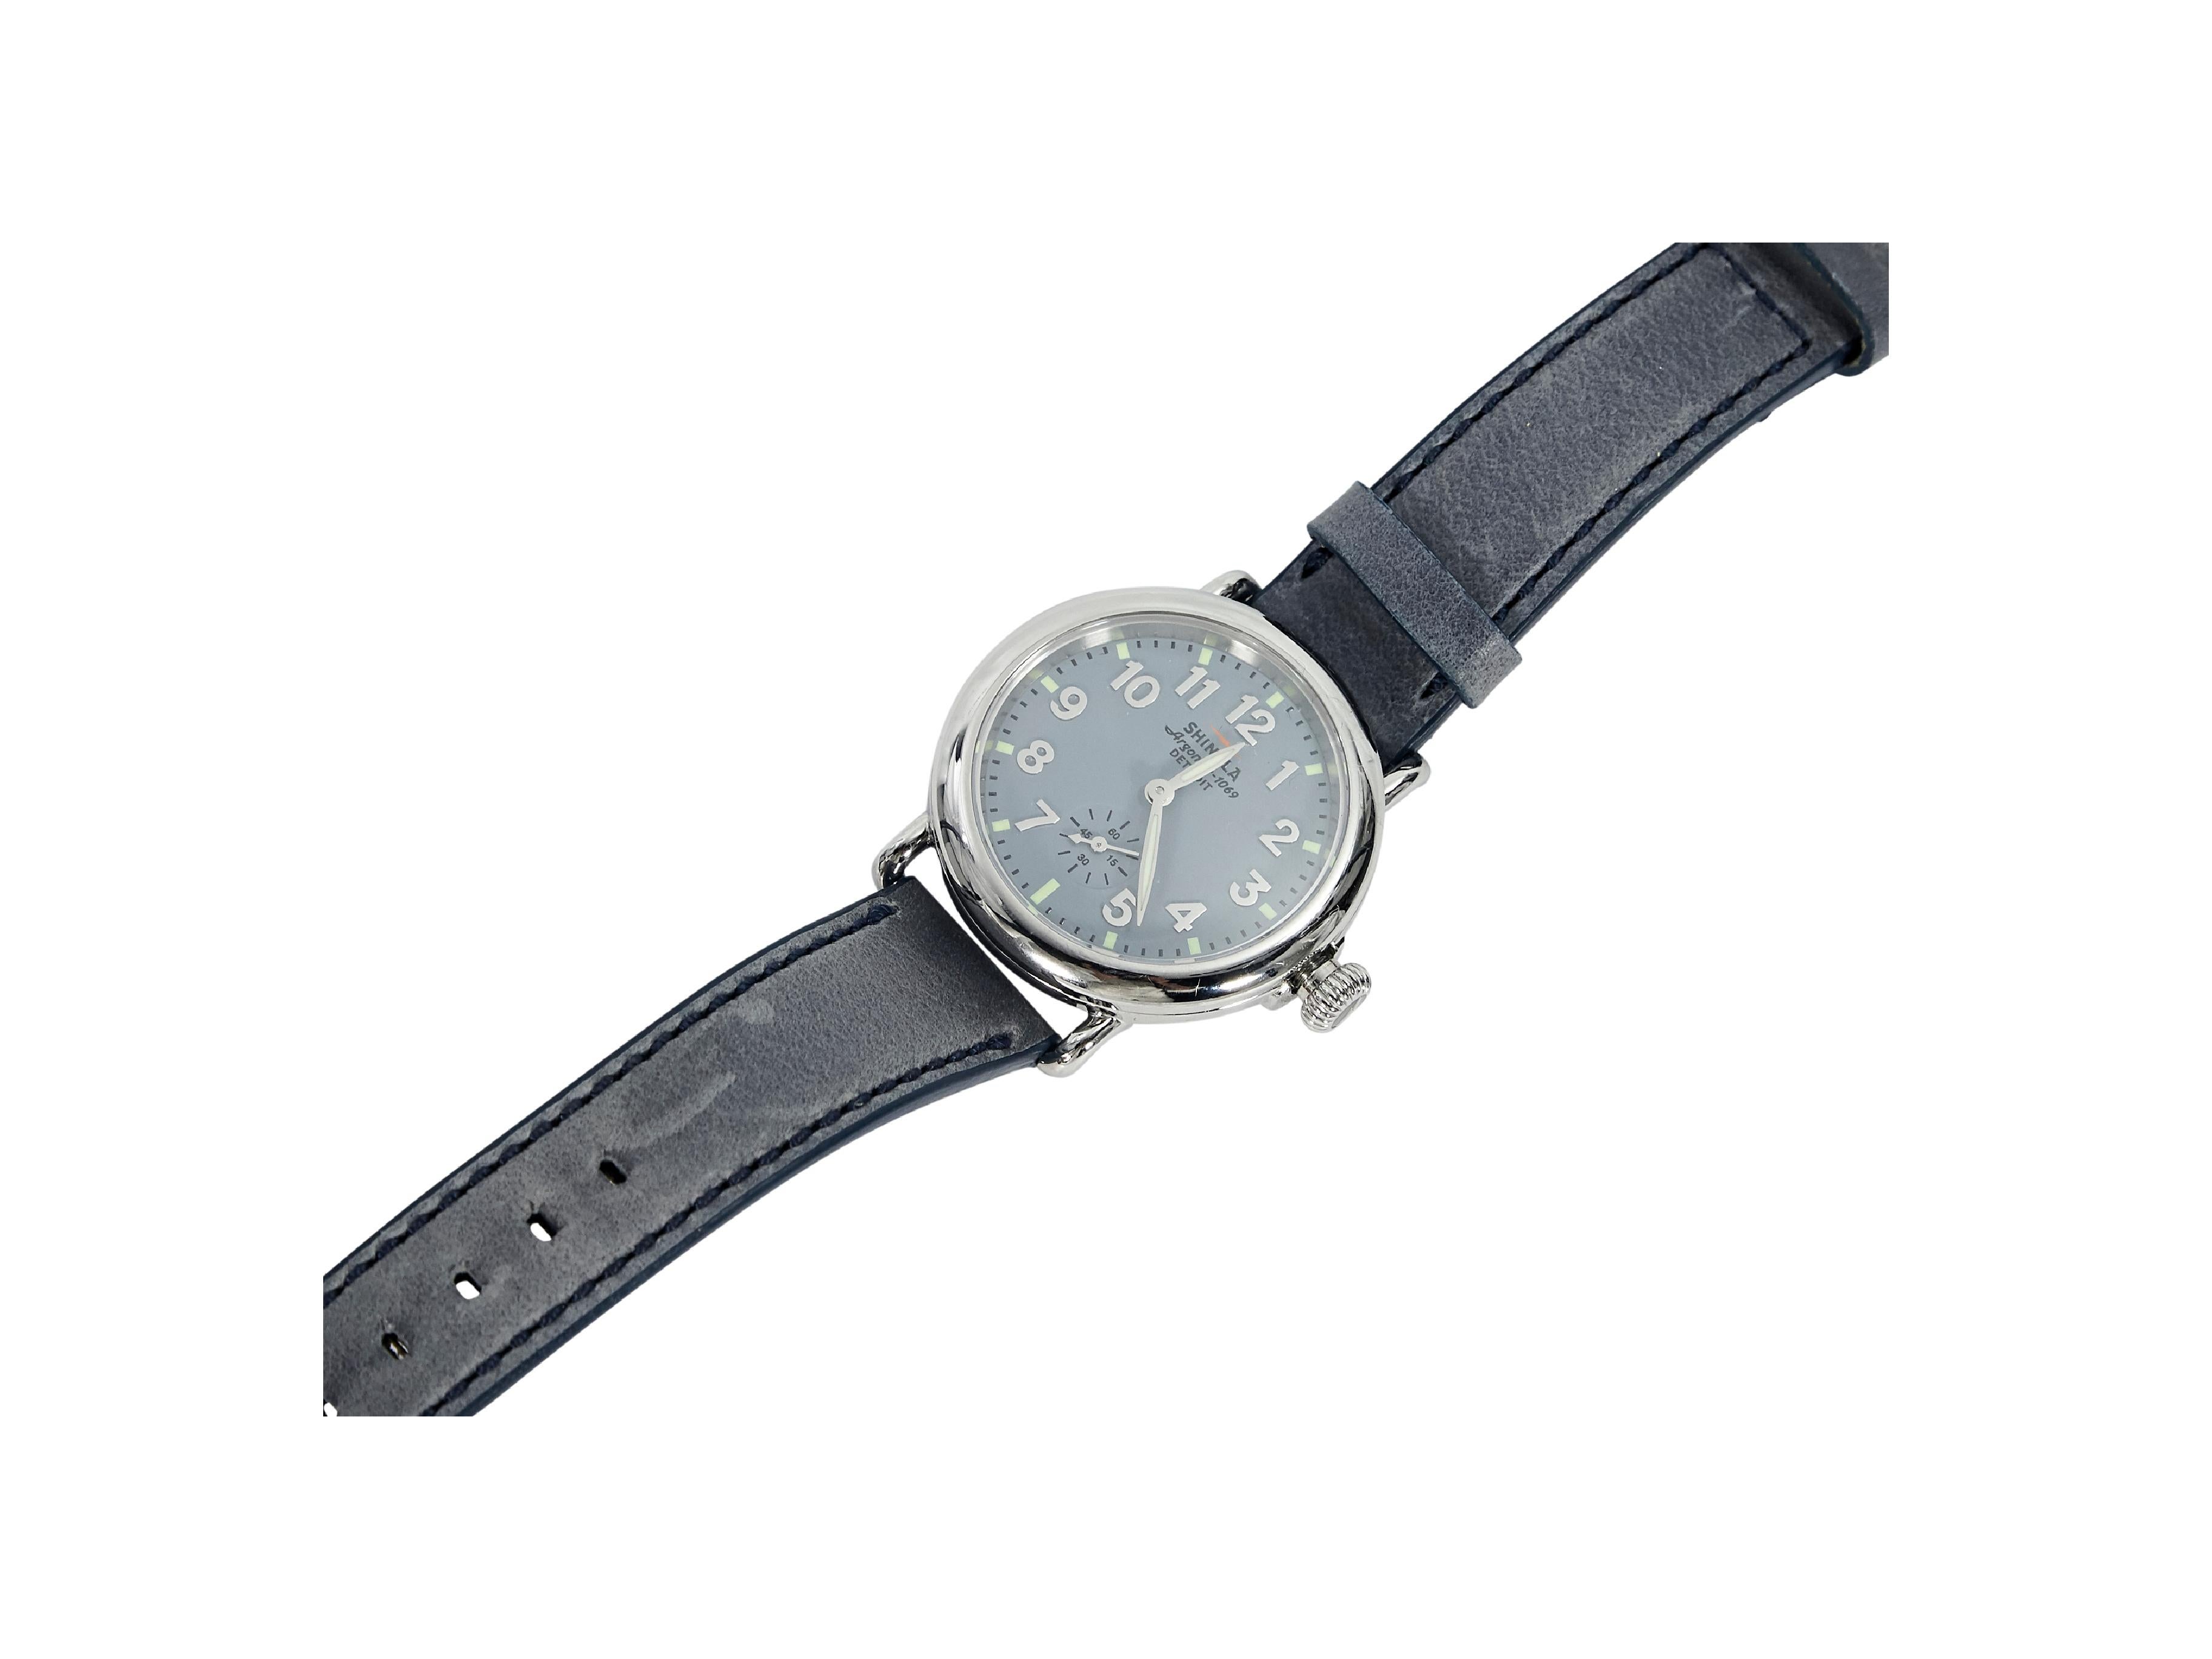 Product details:  Stainless steel and leather watch by Shinola.  Sapphire crystal.  Silvertone and luminous hour and minute hands and hour markers.  Stainless steel case.  Blue leather strap.  Adjustable buckle closure.  1.25